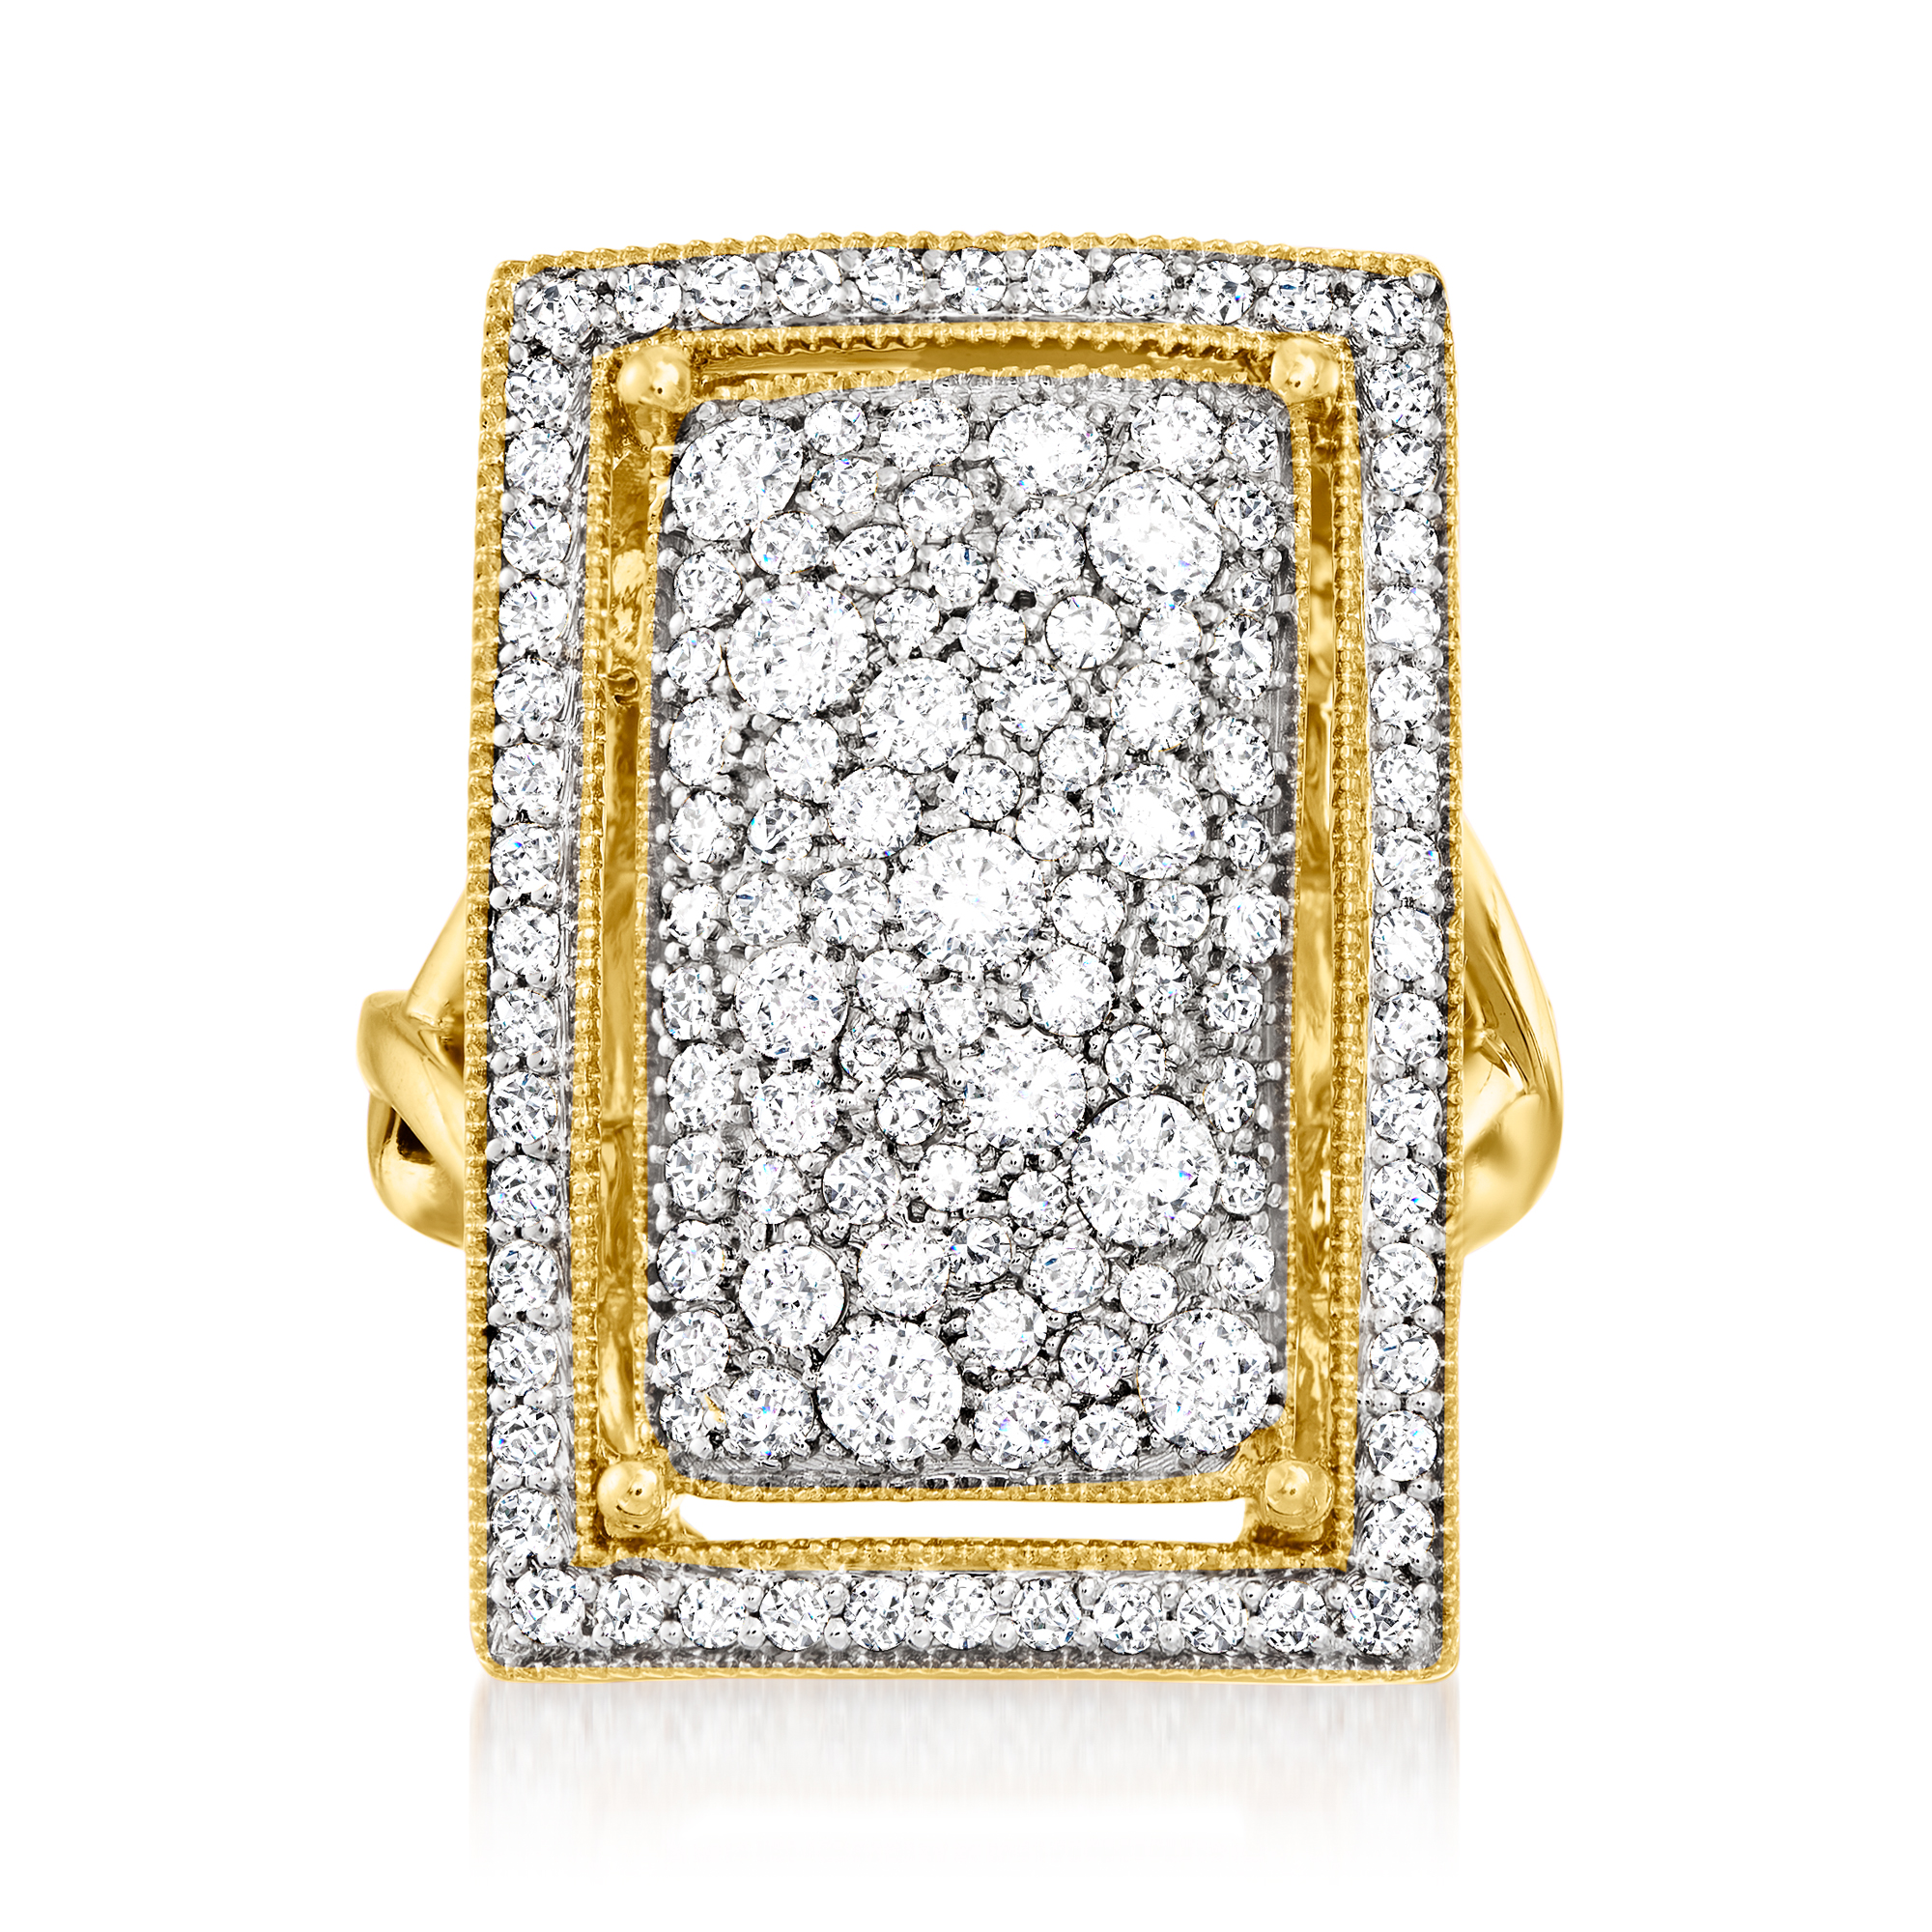 1.50 ct. t.w. Pave Diamond Rectangular Ring in 14kt Yellow Gold 